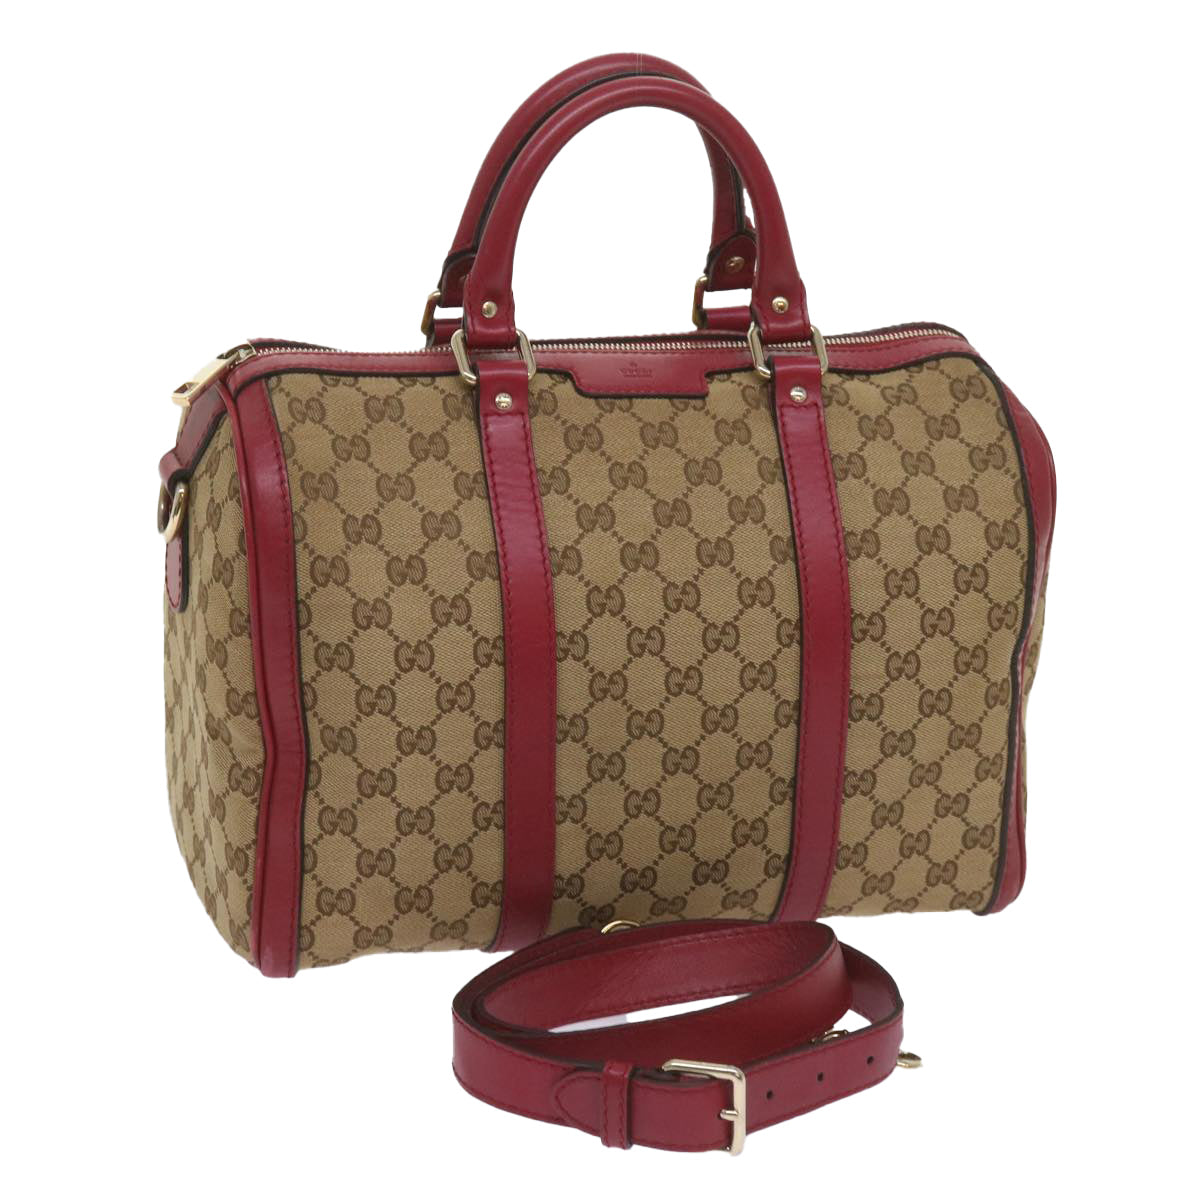 GUCCI GG Canvas Hand Bag 2way Beige Red 247205 Auth 68594